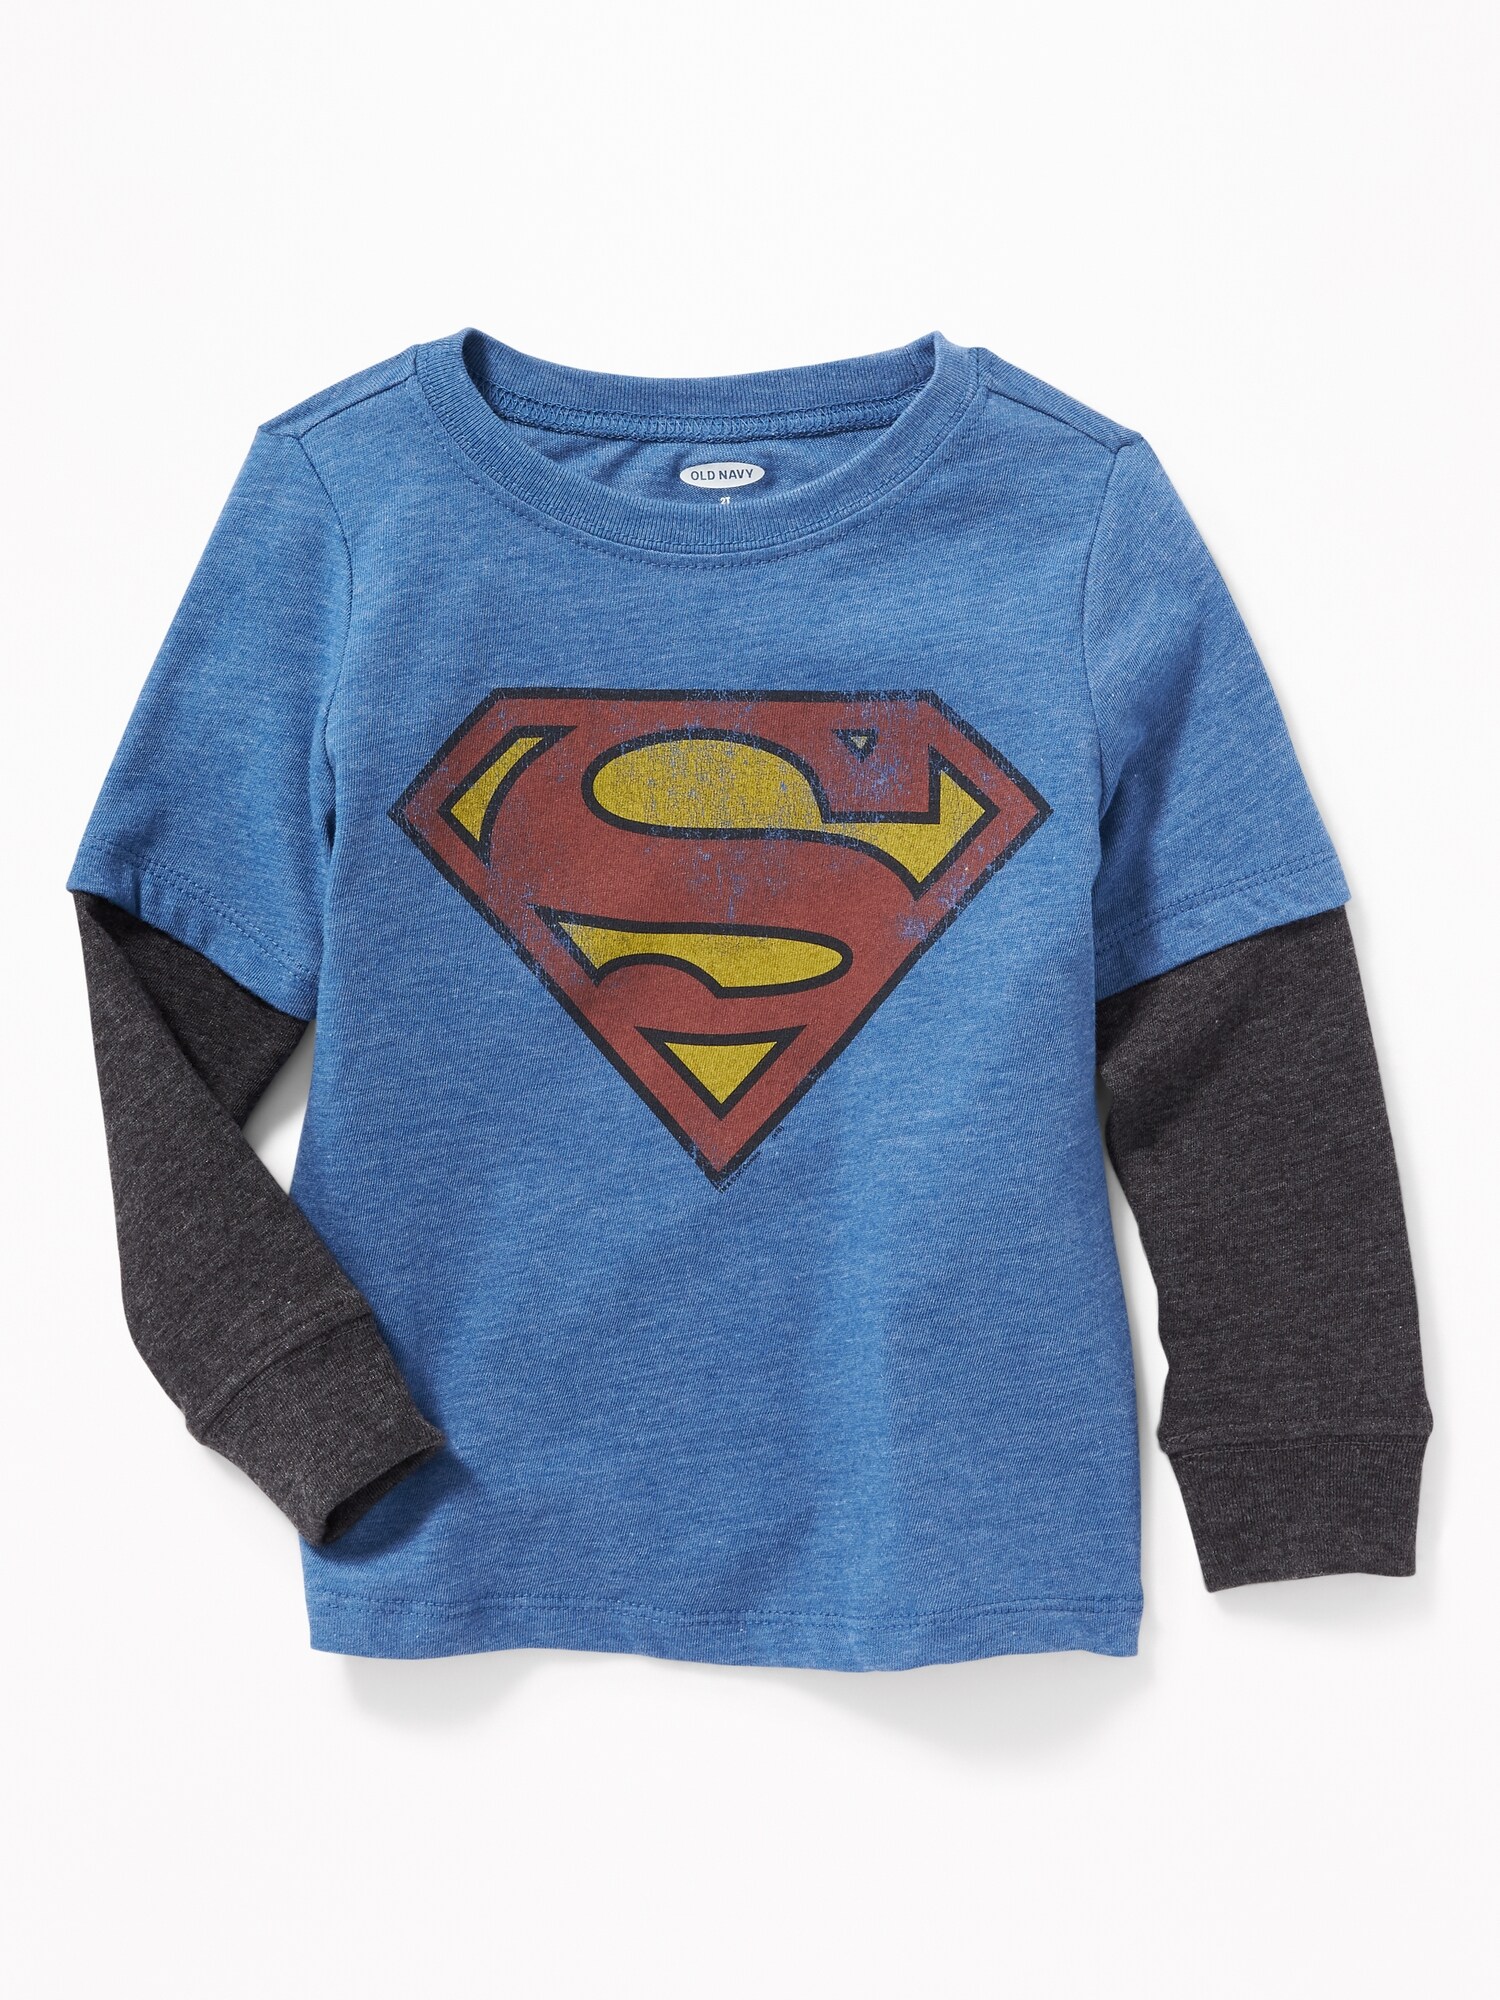 DC Comics Superman 2-in-1 Tee for Toddler Boys